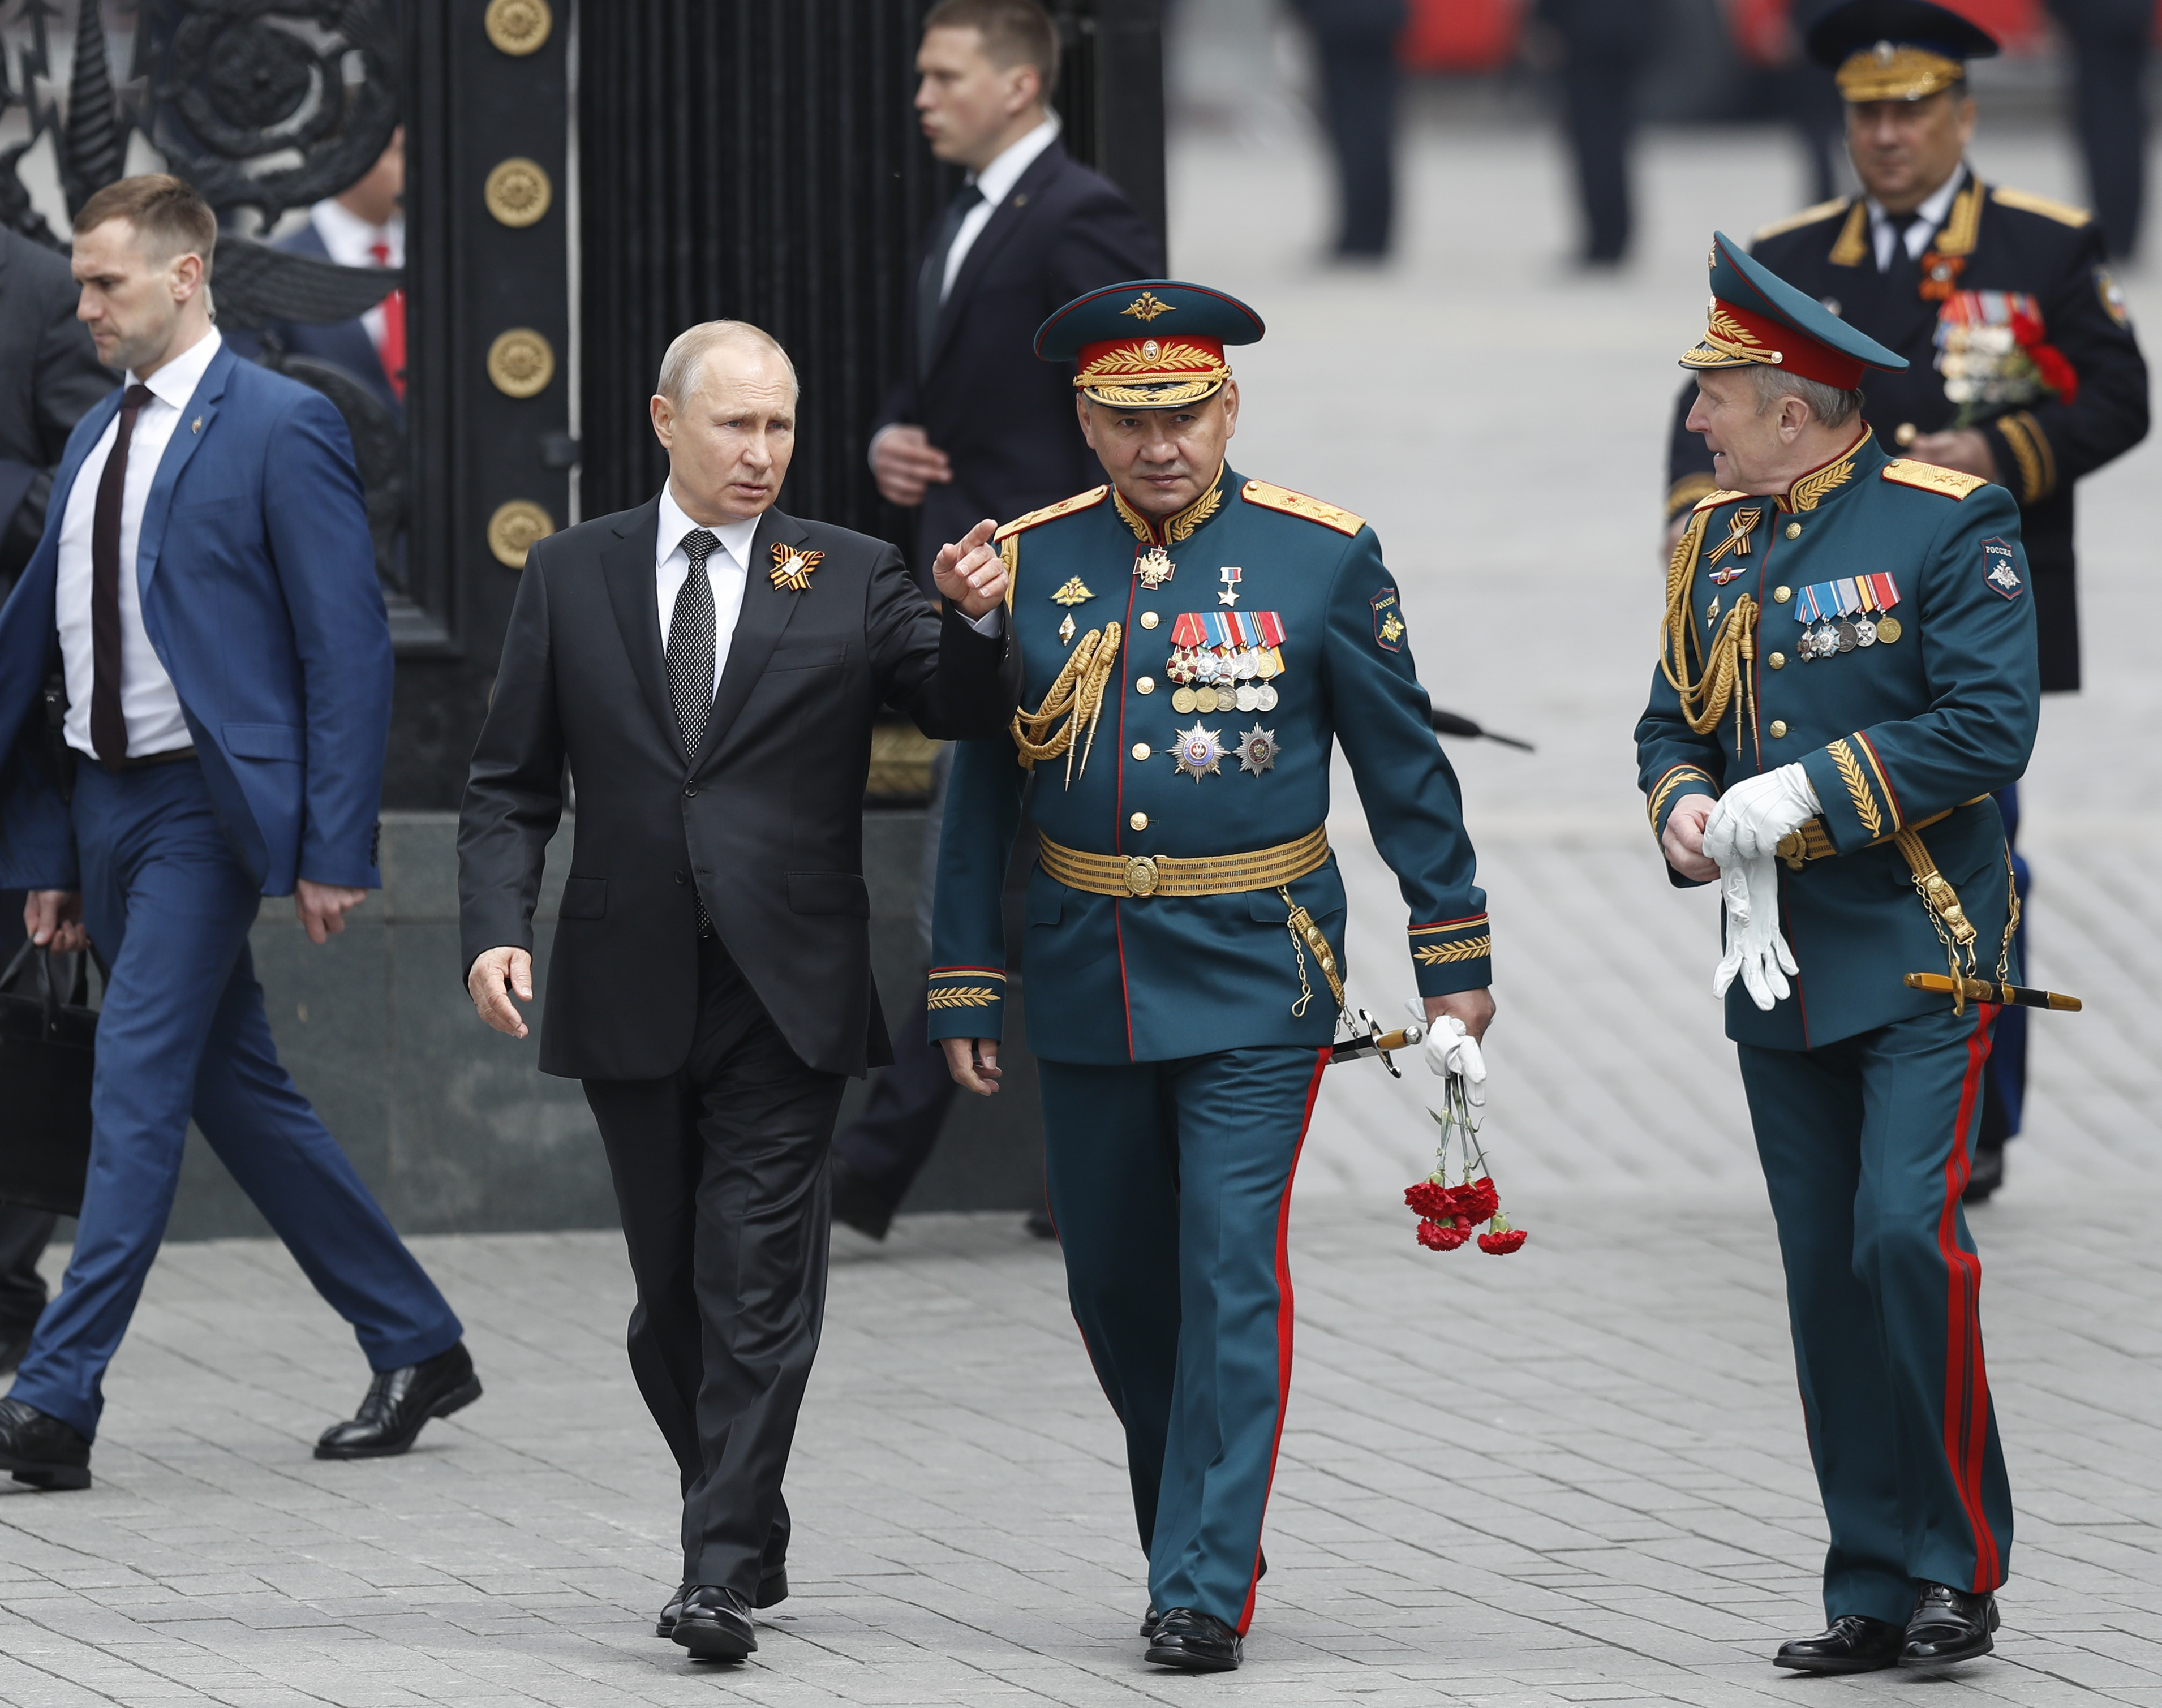 Russian President Vladimir Putin, centre left, Russian Defense Minister Sergei Shoigu, center, and Commander-in-Chief of the Graund Forces and Victory Parade Commander Colonel-General Oleg Salyukov, right, walk to attend a wreath-laying ceremony at the Tomb of the Unknown Soldier after the military parade marking 74 years since the victory in WWII in Moscow, Russia, Thursday, May 9, 2019. (AP Photo/Pavel Golovkin)